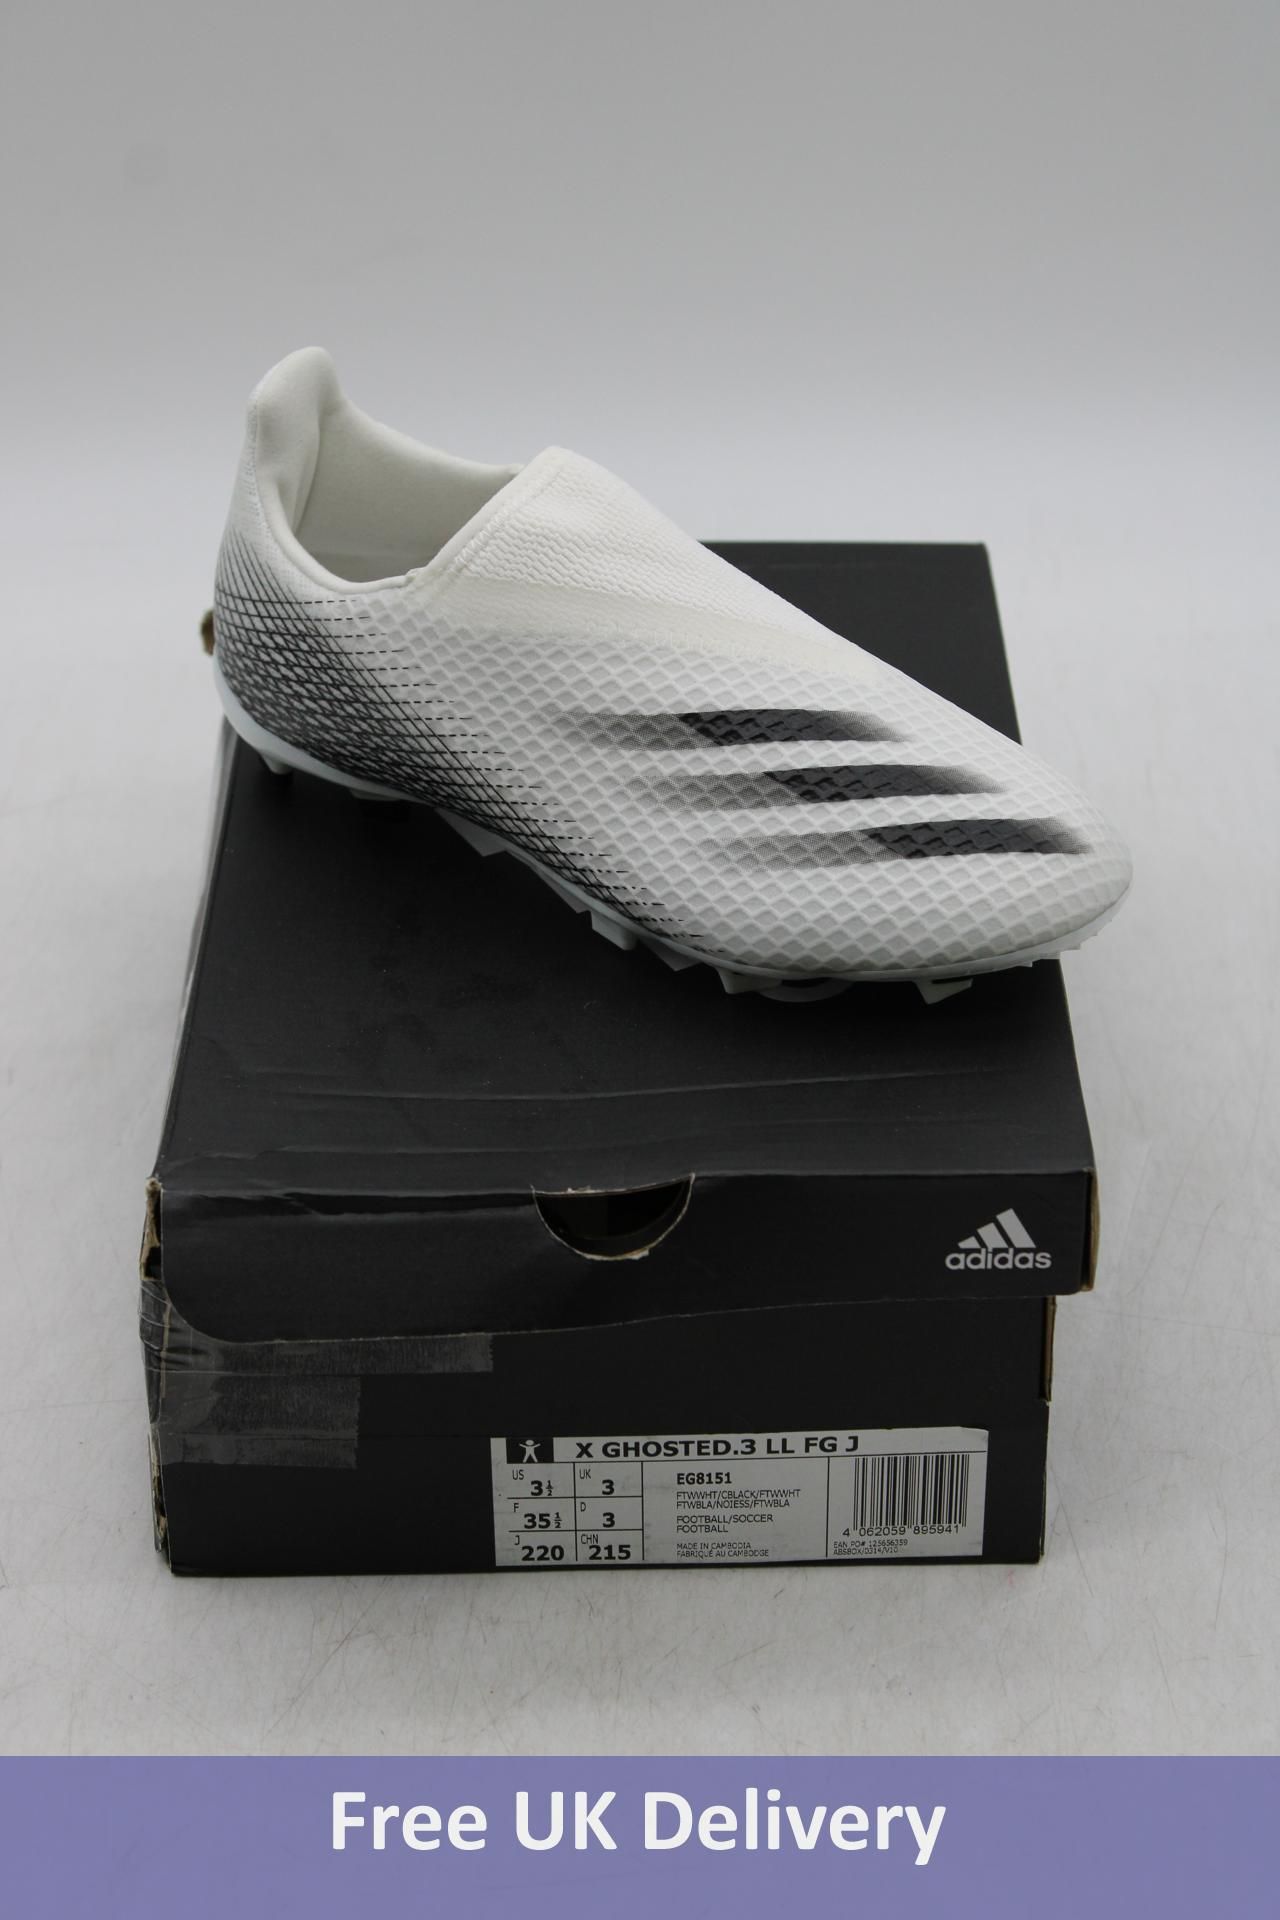 Two Adidas X Ghosted.3 LL FG Football Boots, White/Black, Size Includes 1x UK 3 & 1x UK 4.5. Box dam